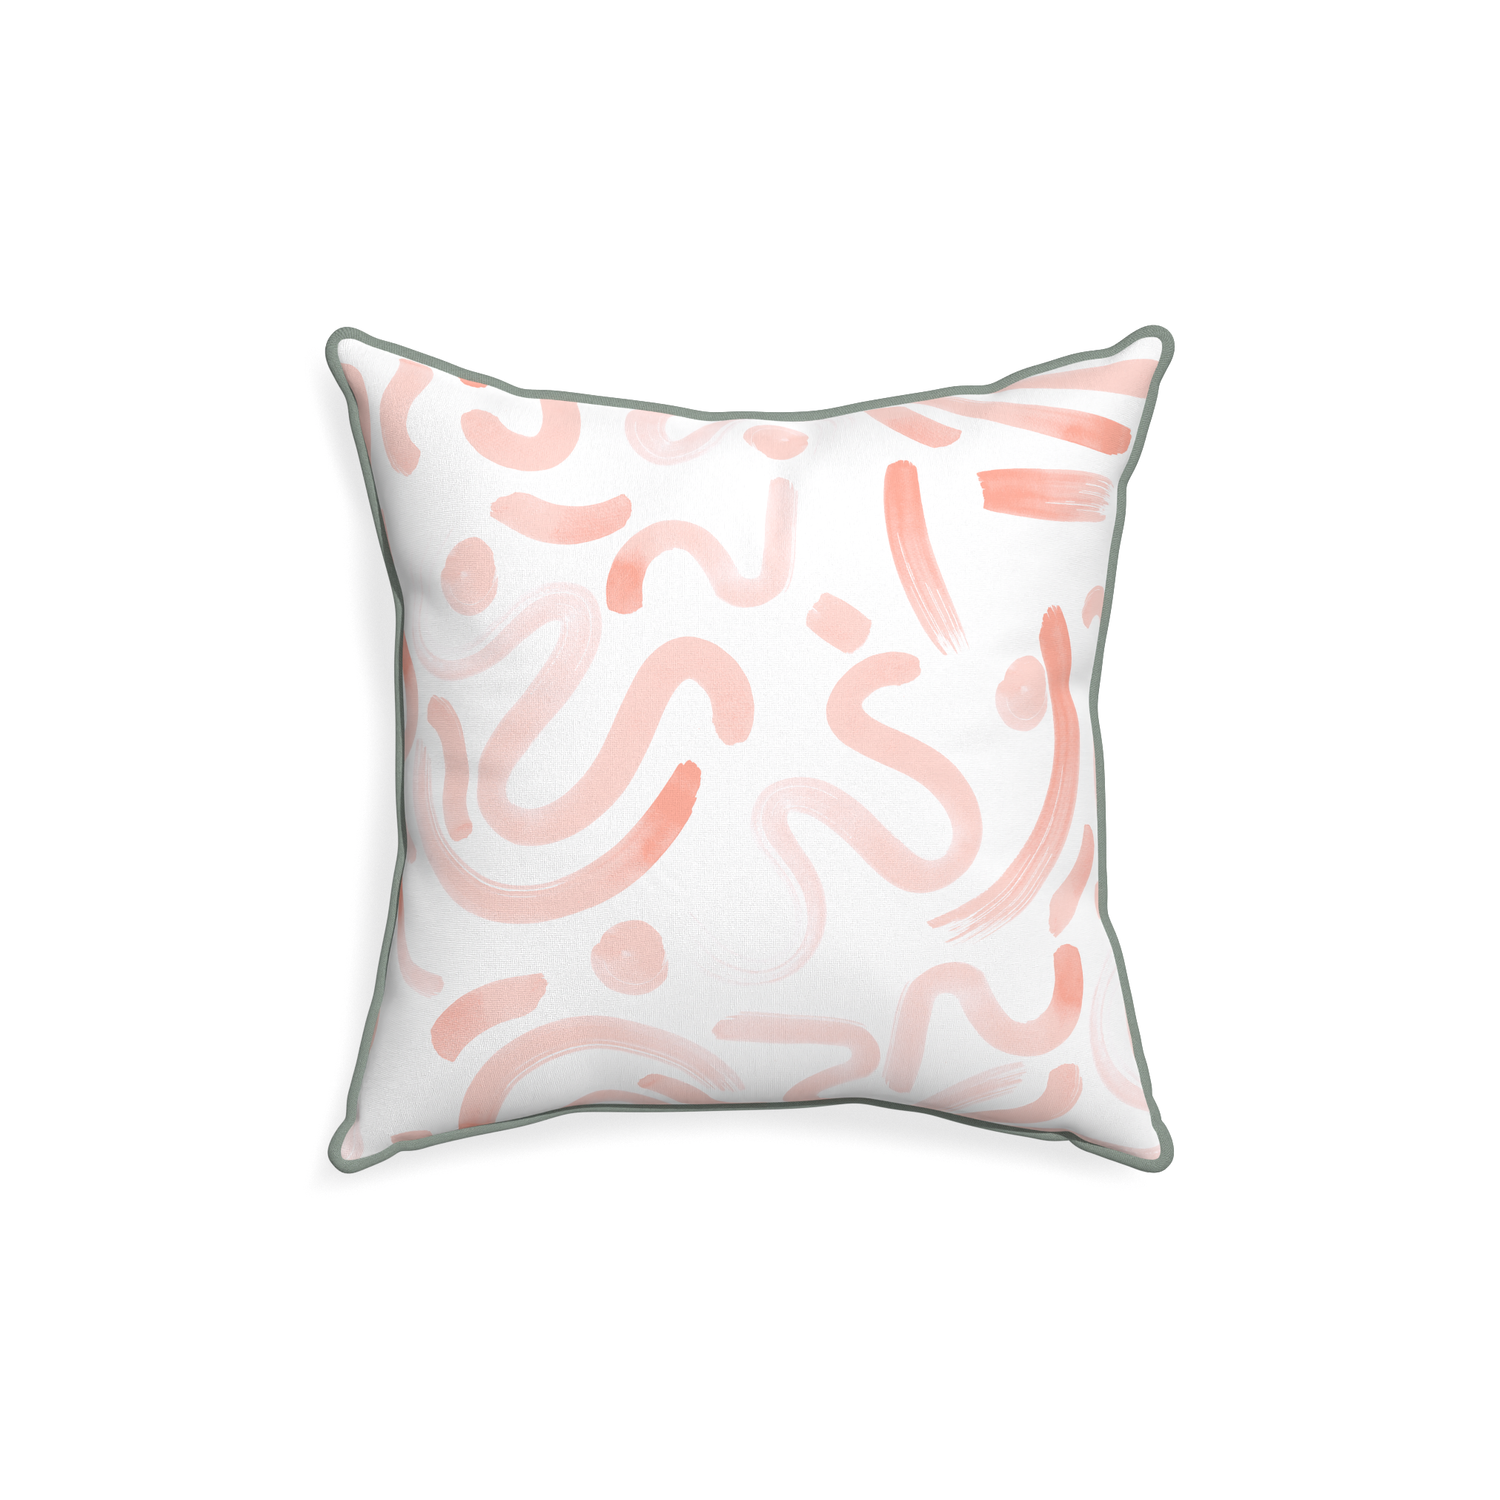 18-square hockney pink custom pink graphicpillow with sage piping on white background